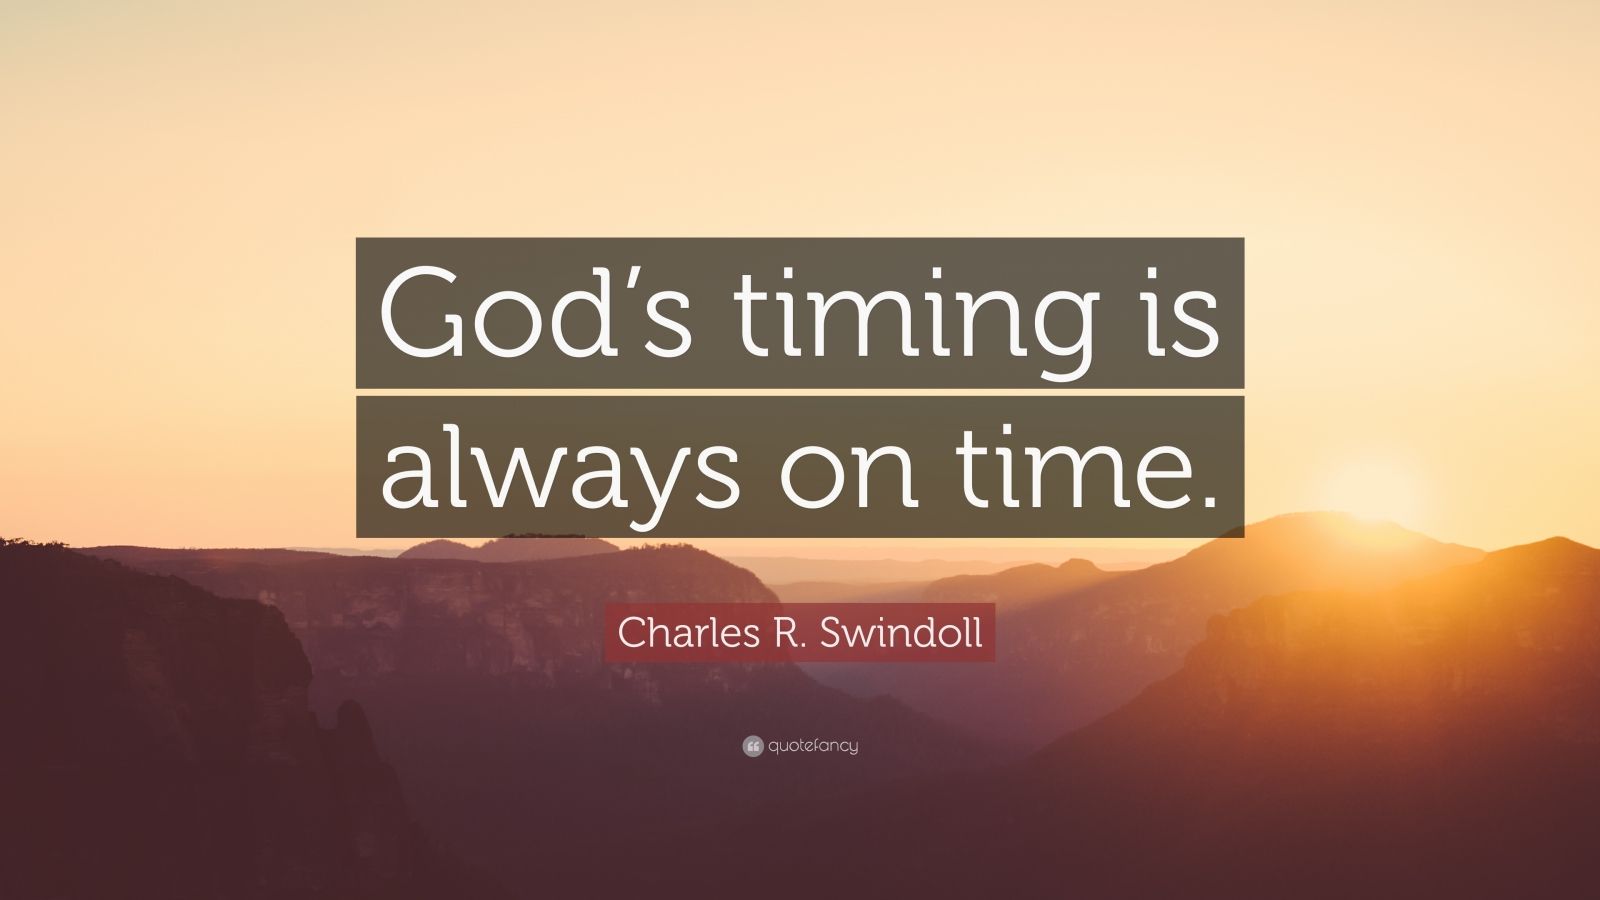 Charles R. Swindoll Quote “God’s timing is always on time.” (7